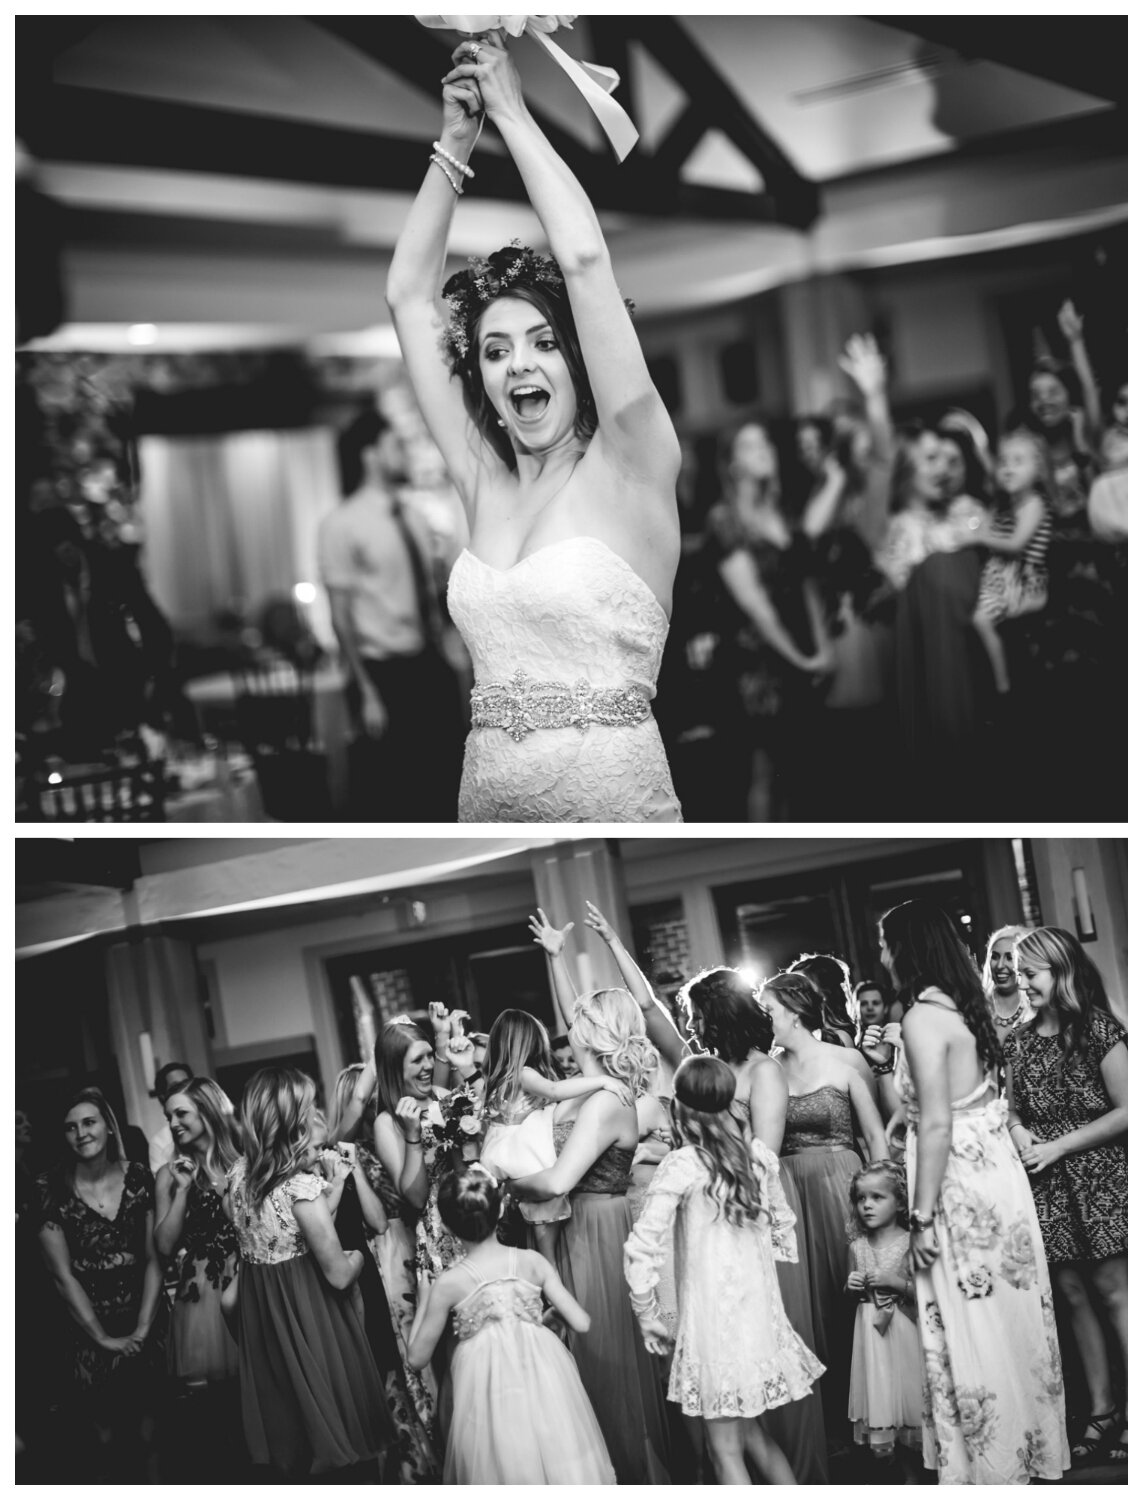  Bouquet toss at Highlands Ranch Mansion.&nbsp;  Photographed by JMGant Photography, Denver Colorado wedding photographer.&nbsp; 